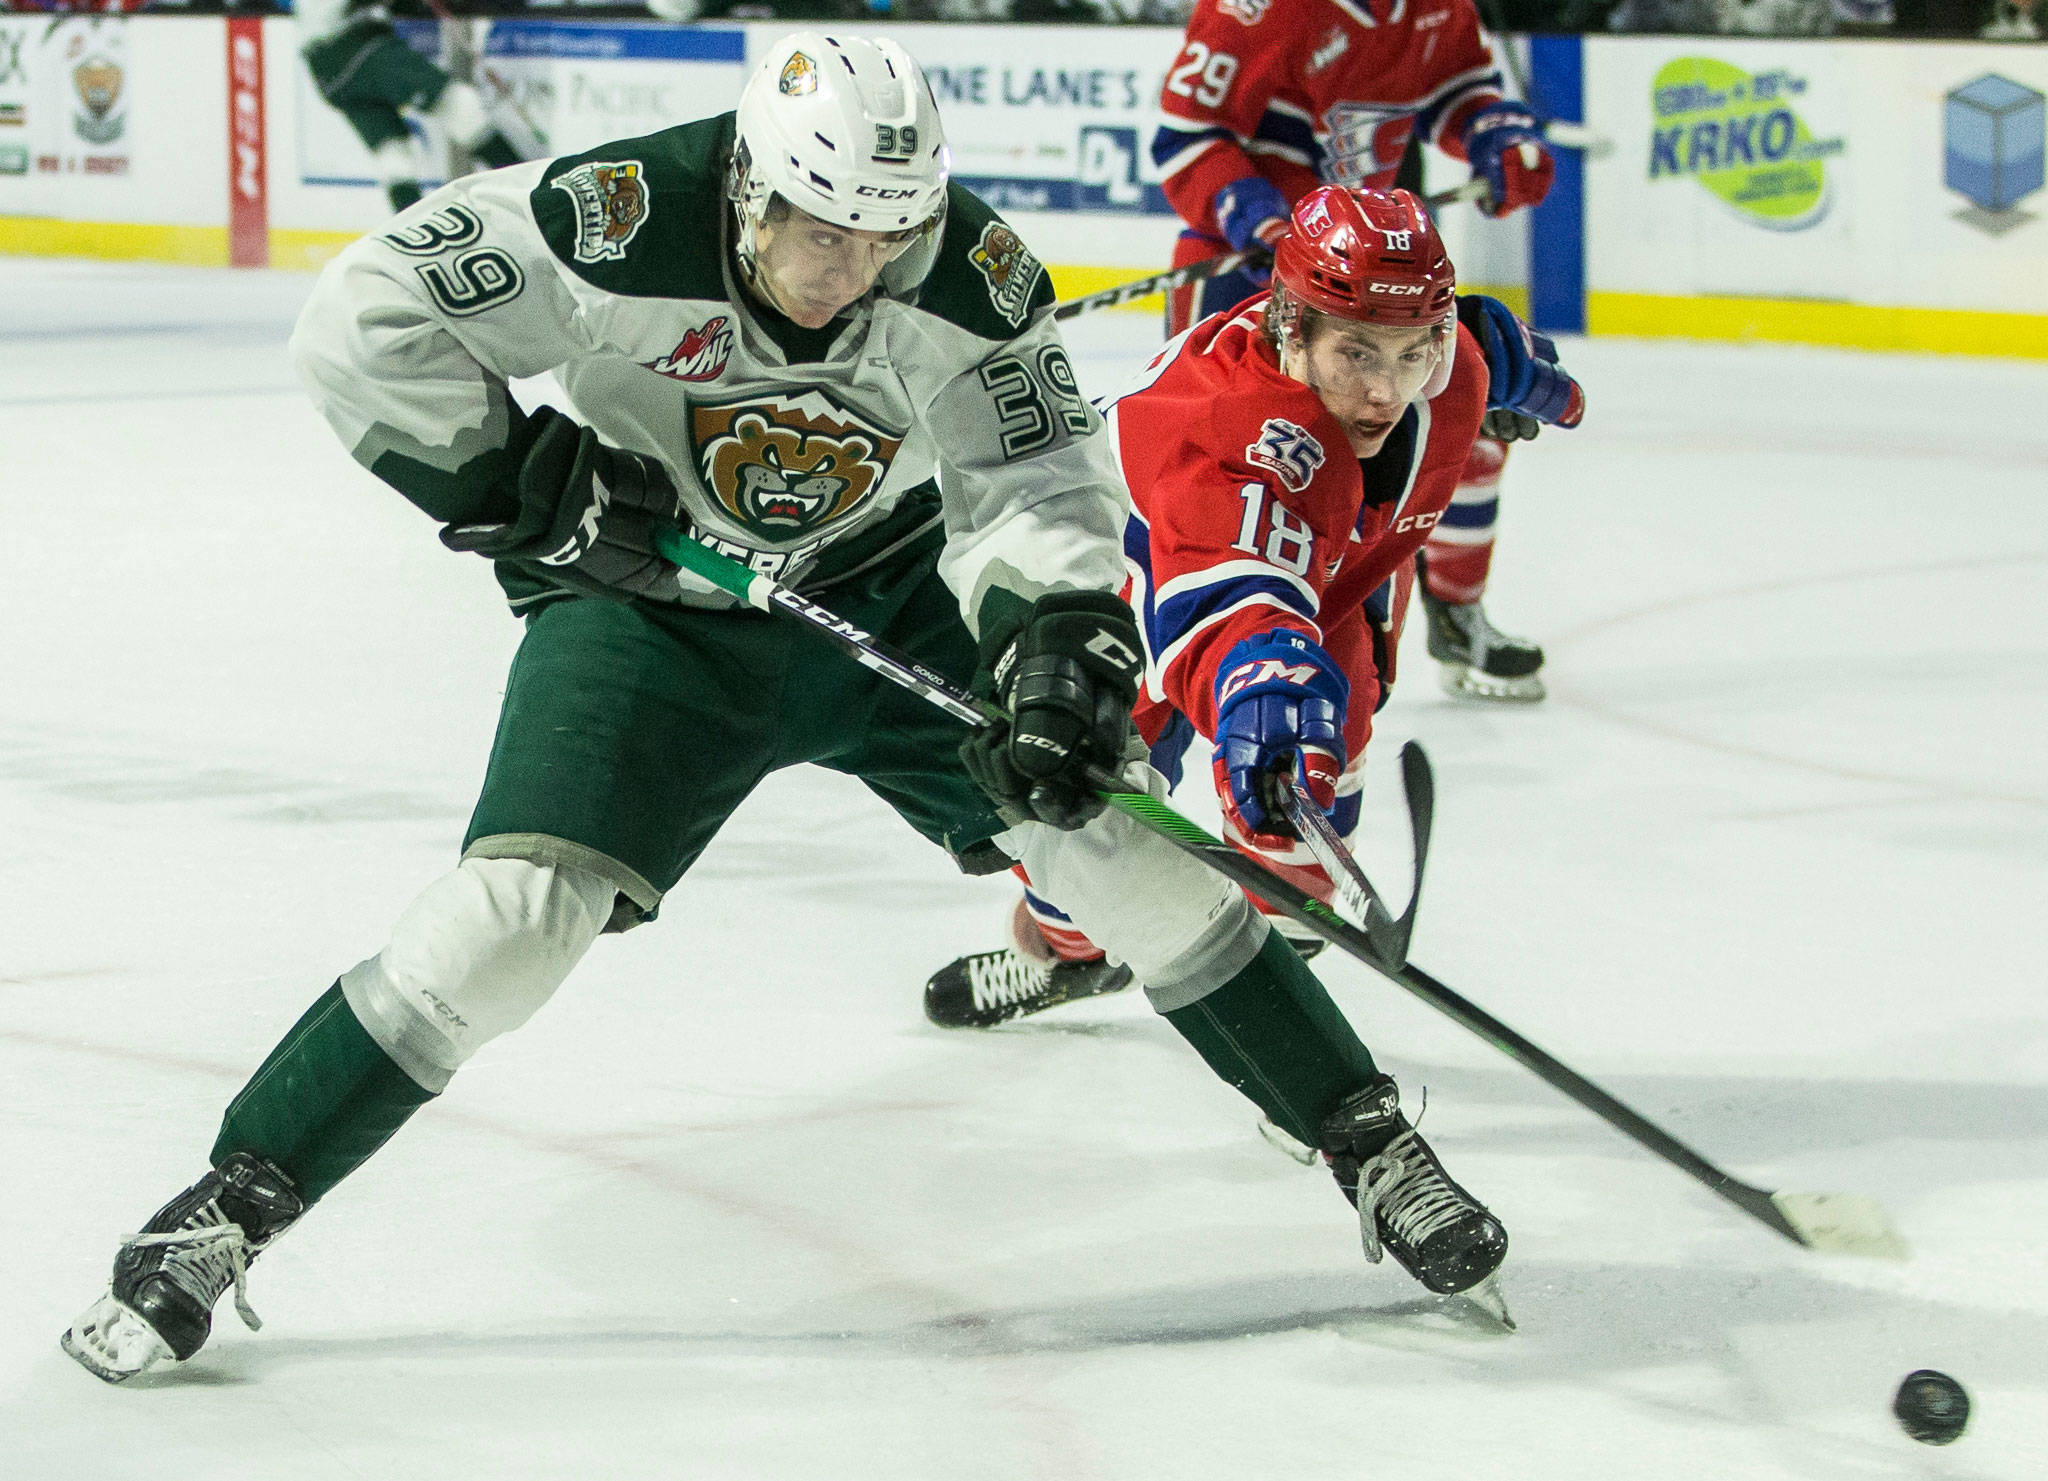 The Silvertips’ Gage Goncalves fights the Chiefs’ Filip Kral for the puck during a game on Jan. 26, 2020, in Everett. (Olivia Vanni / The Herald)